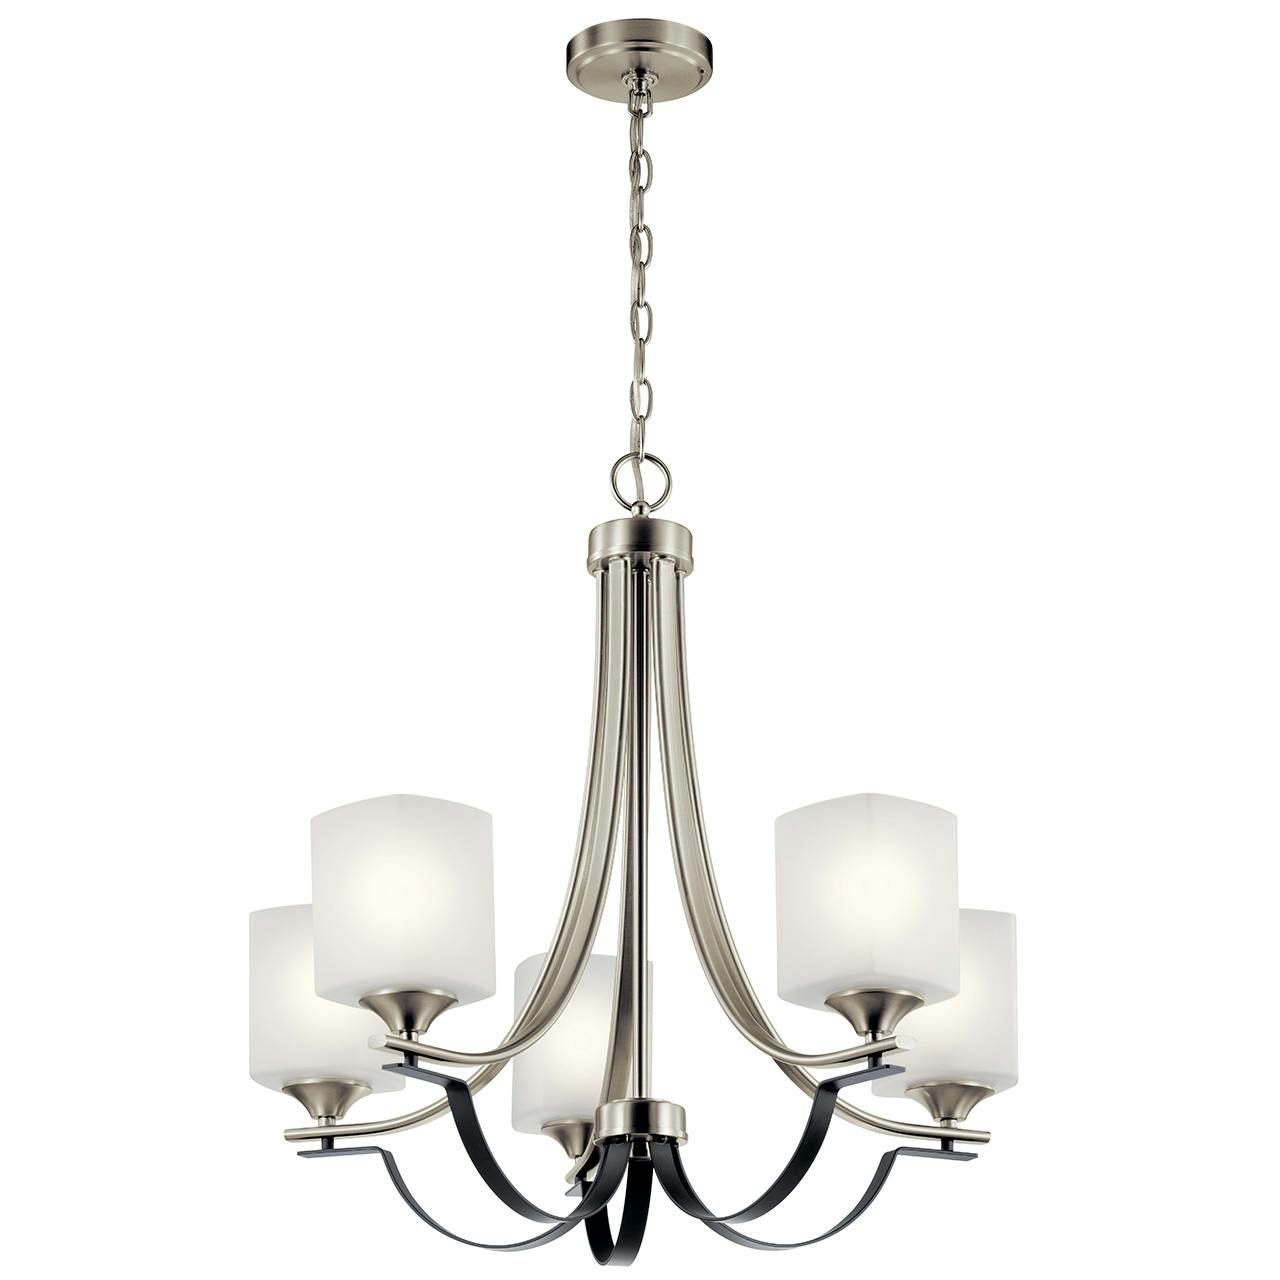 Tula™ 5 Light Chandelier Brushed Nickel on a white background